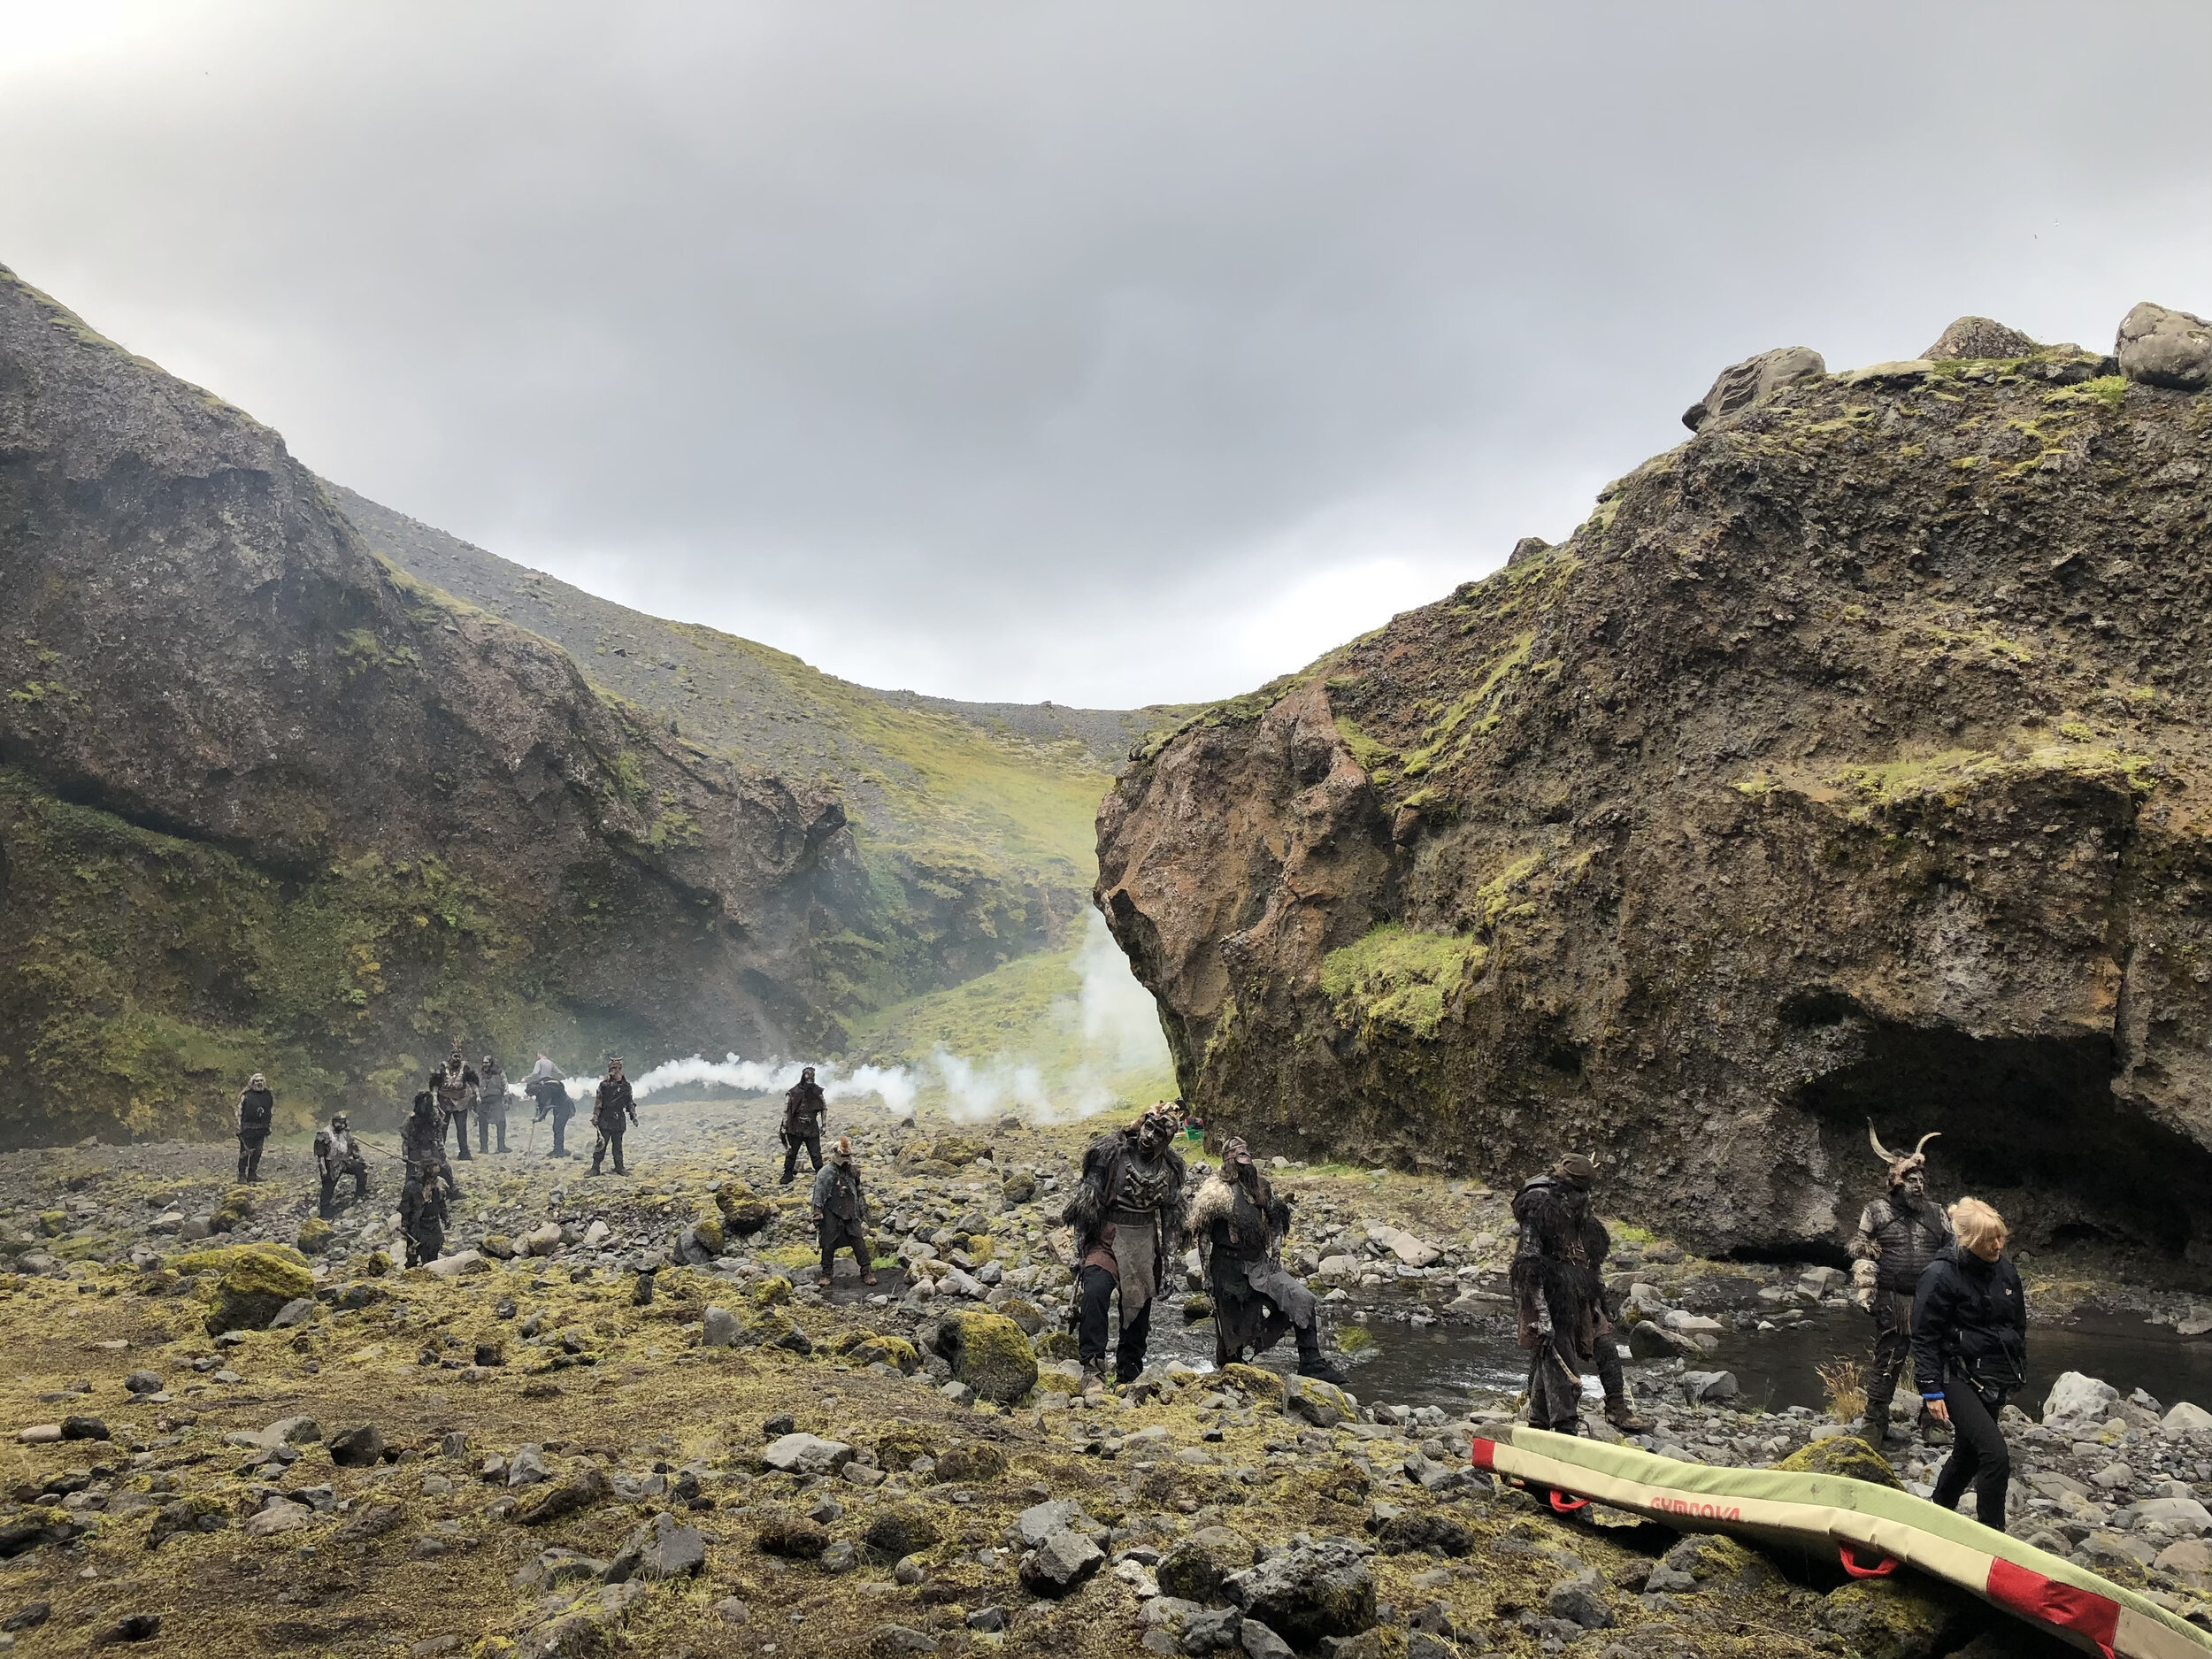 On location in Iceland with some of our extras in the backround.